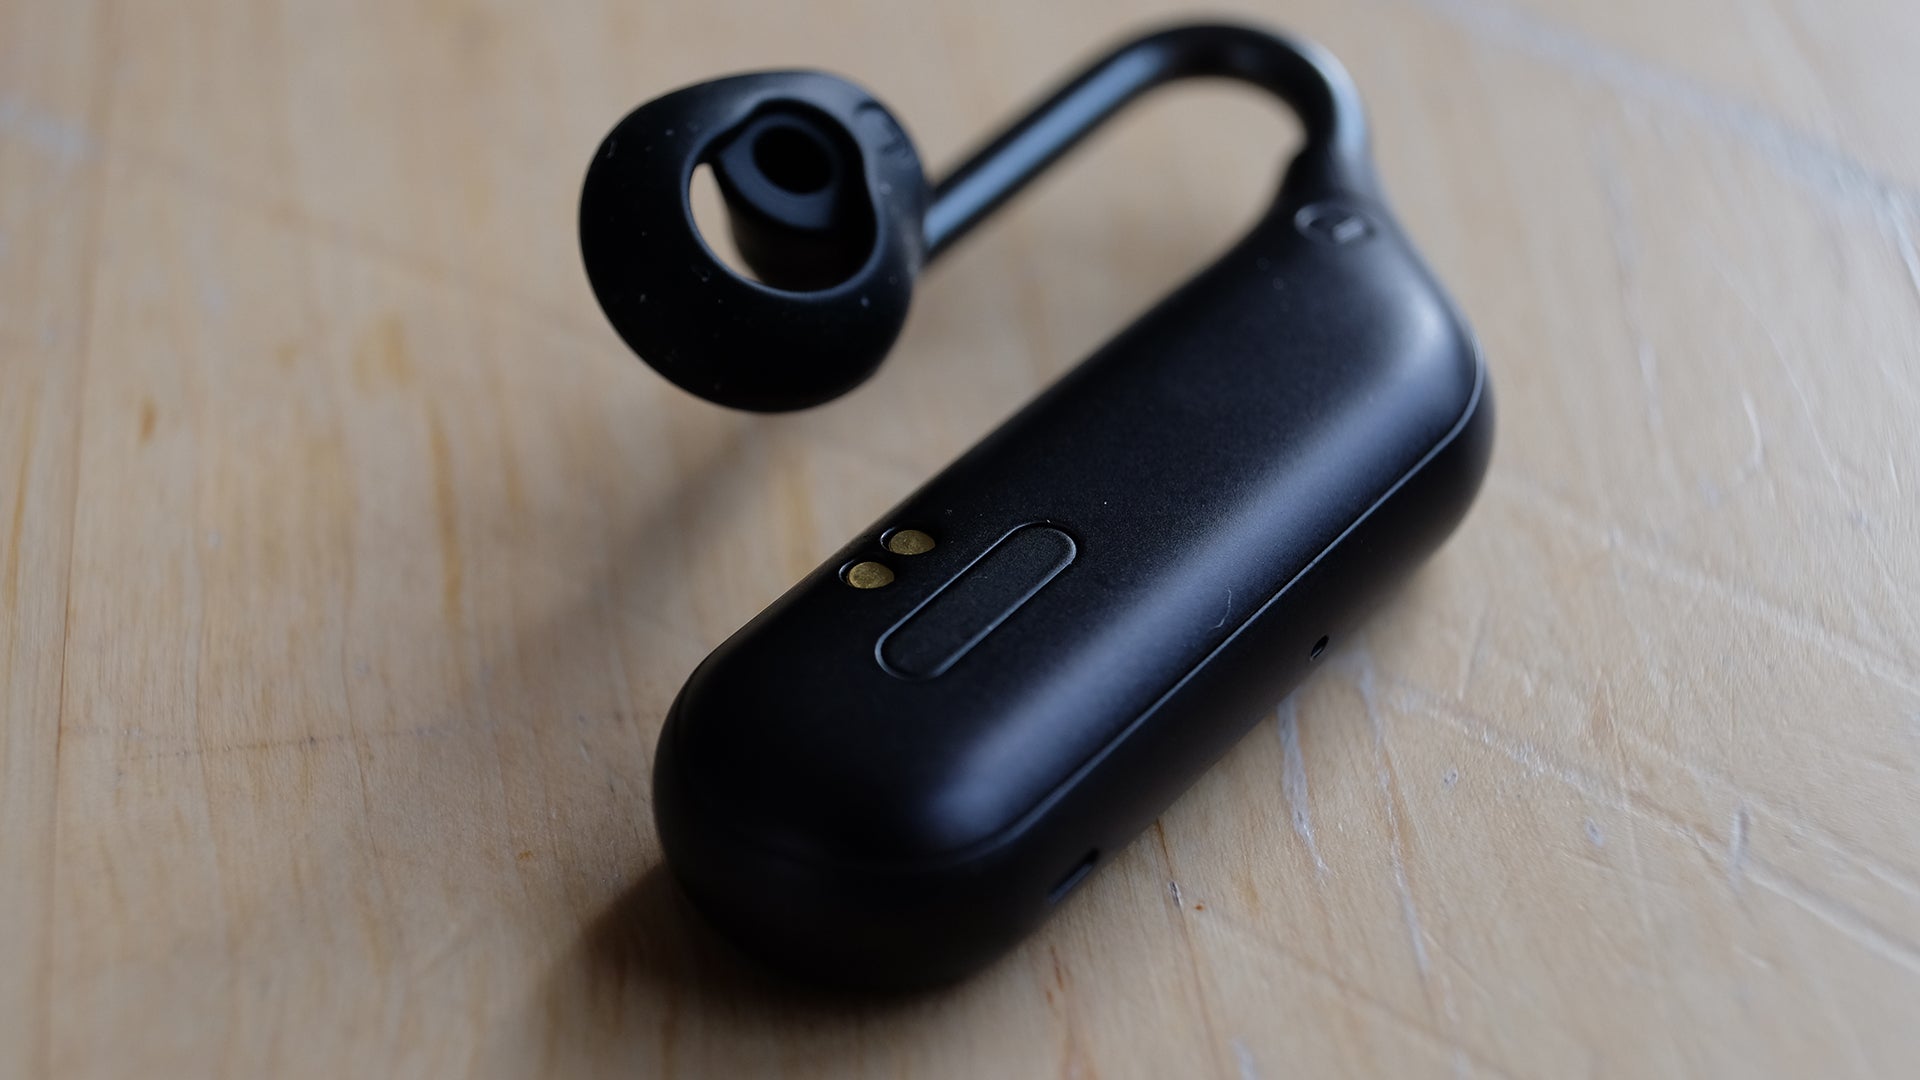 Sony Xperia Ear Duo Review | Trusted Reviews